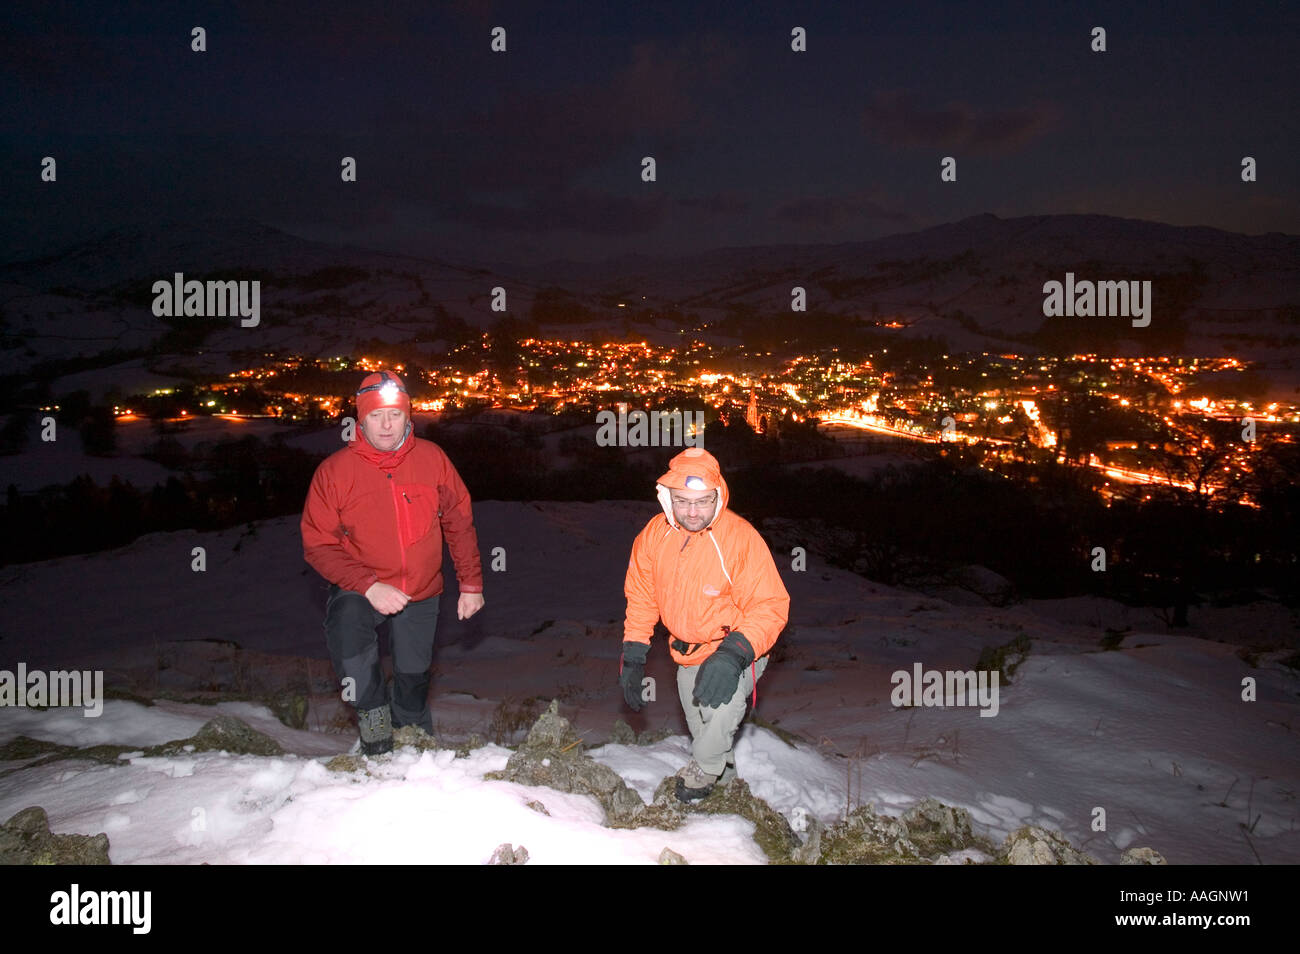 climbers in winter above Ambleside on a snowy night, Lake district, Cumbria, UK Stock Photo